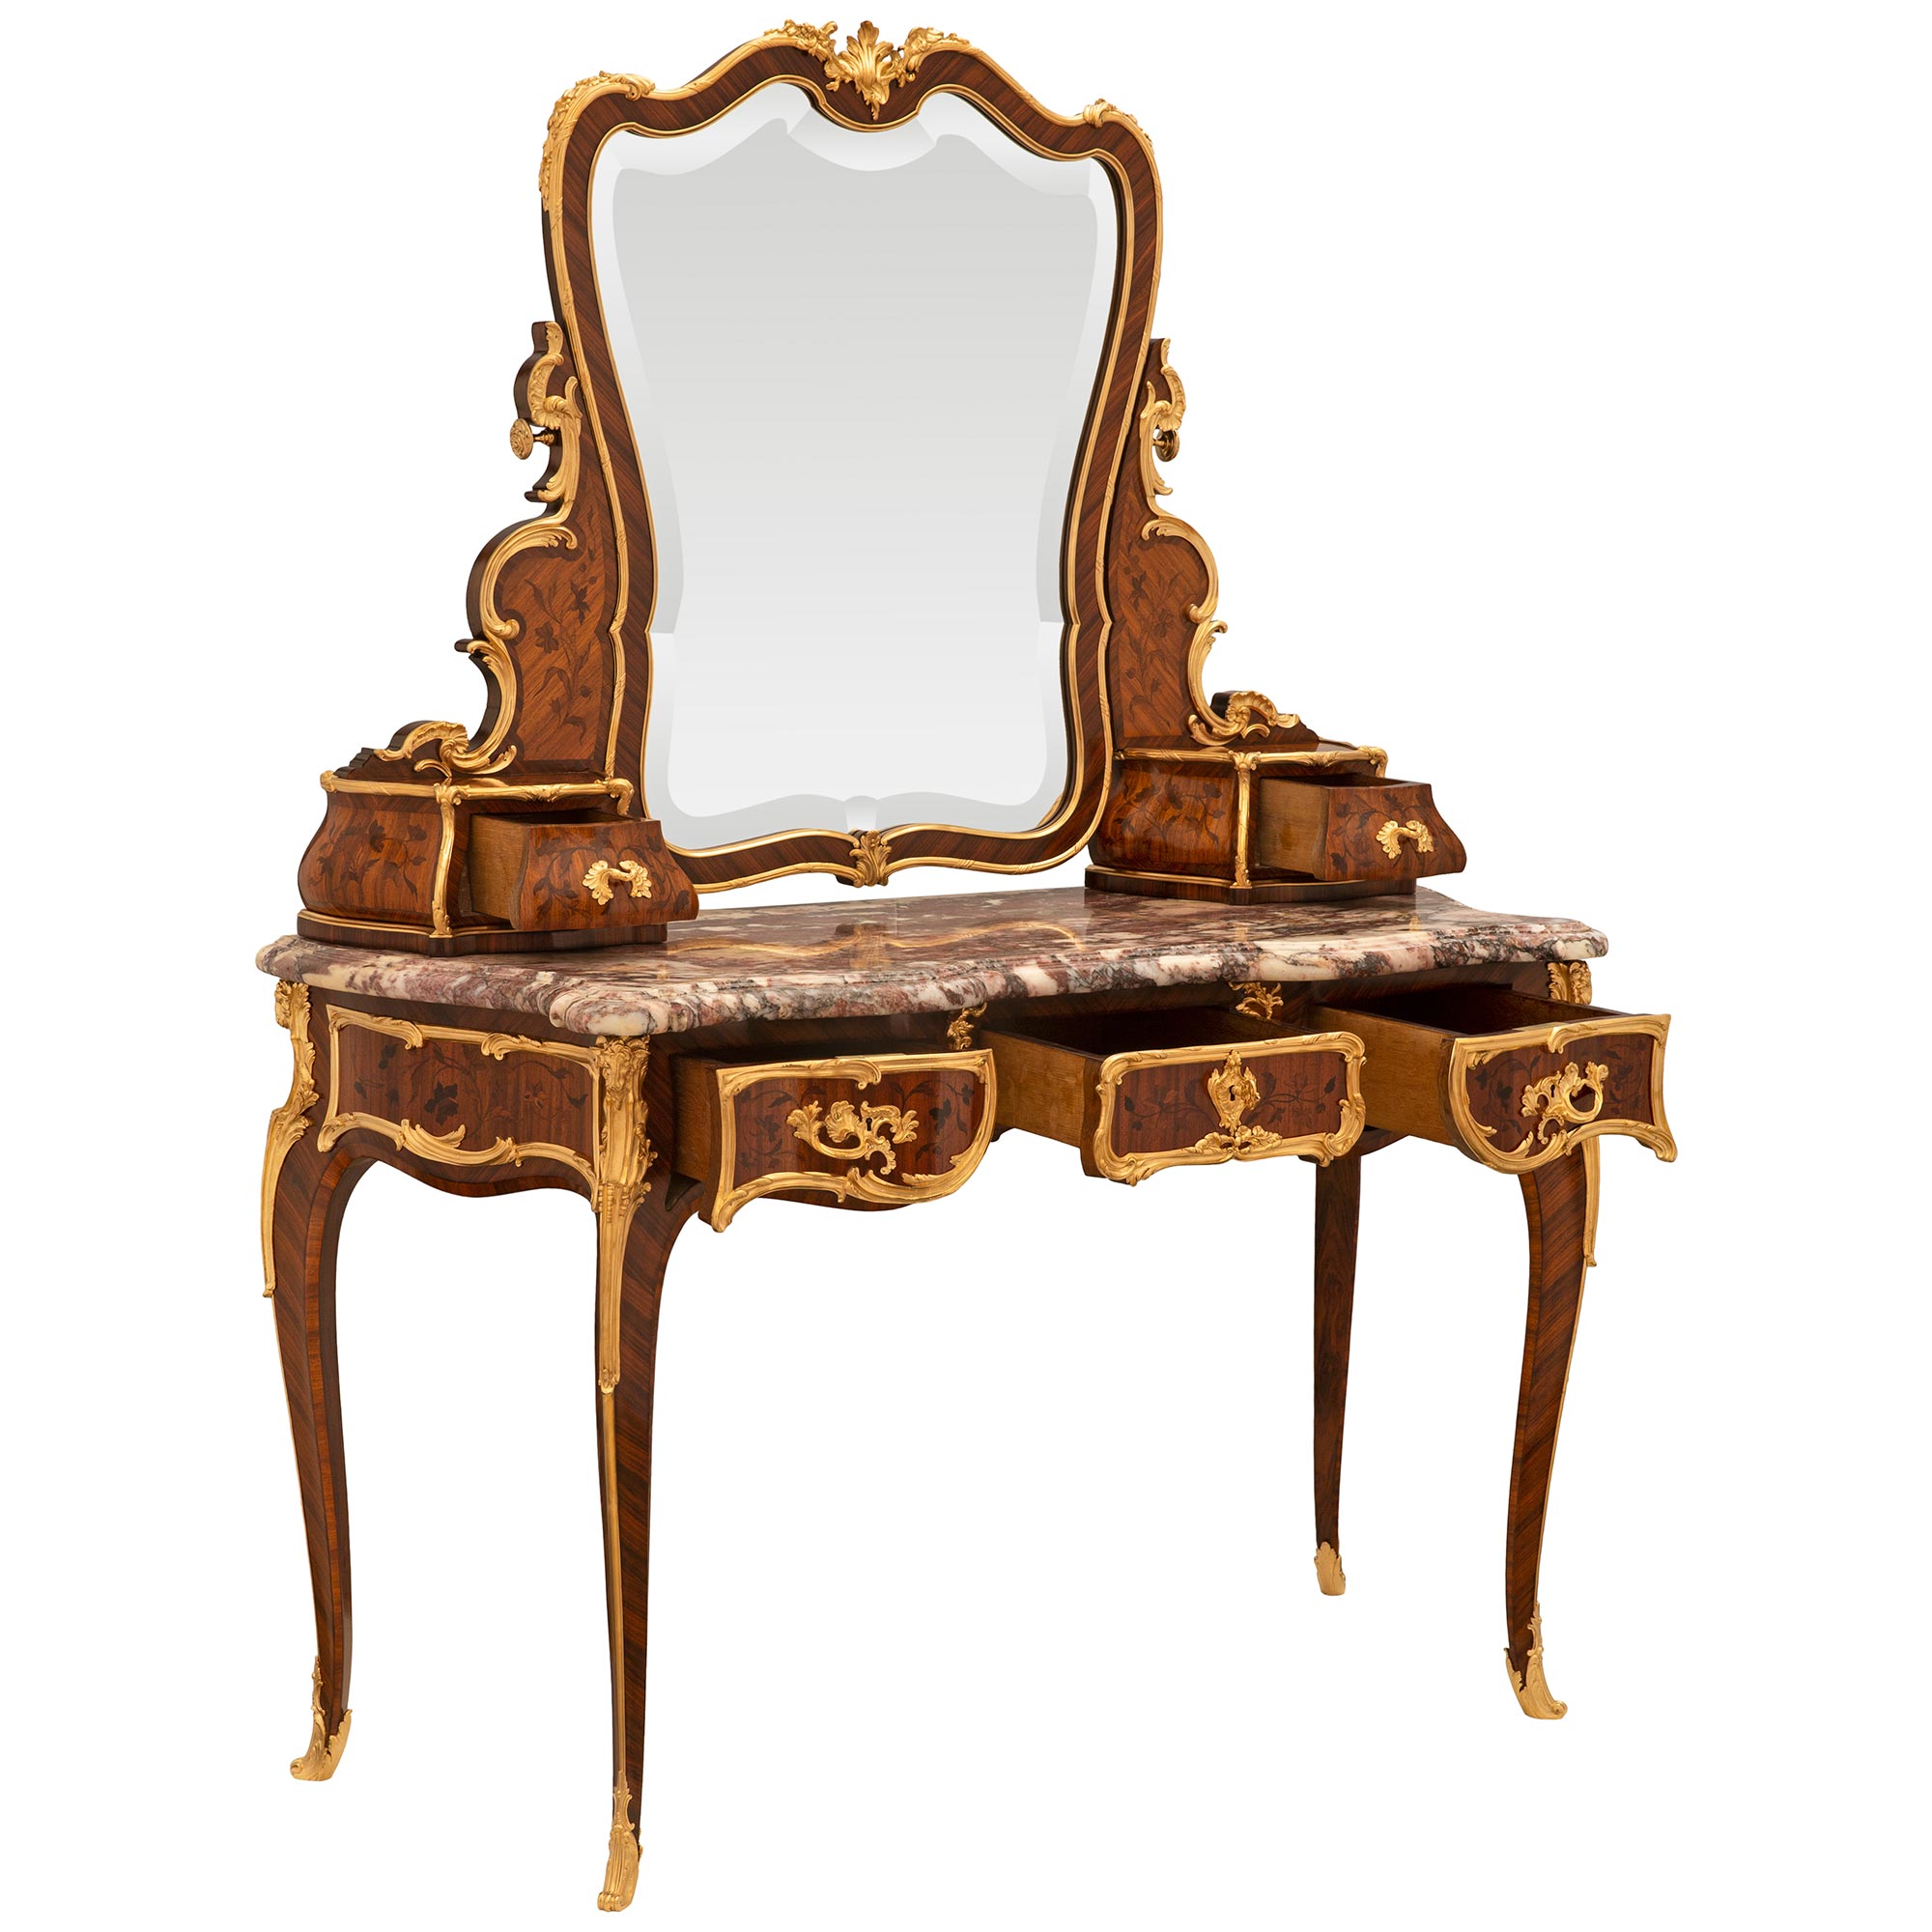 French Table With Marquetry And Ormolu Mounts Louis XV style 19th